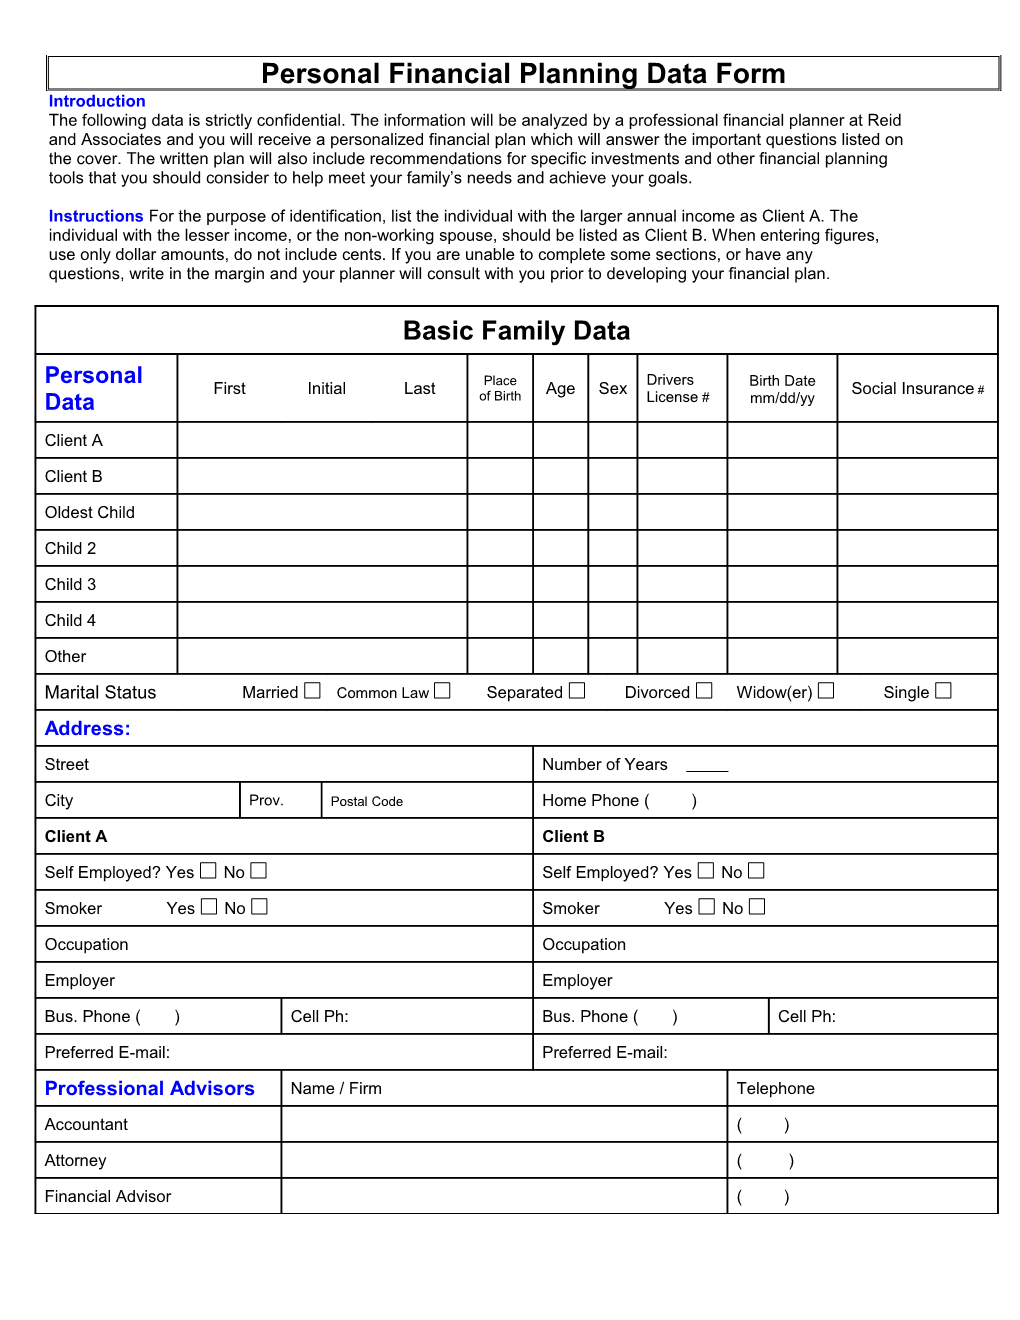 Personal Financial Planning Data Form